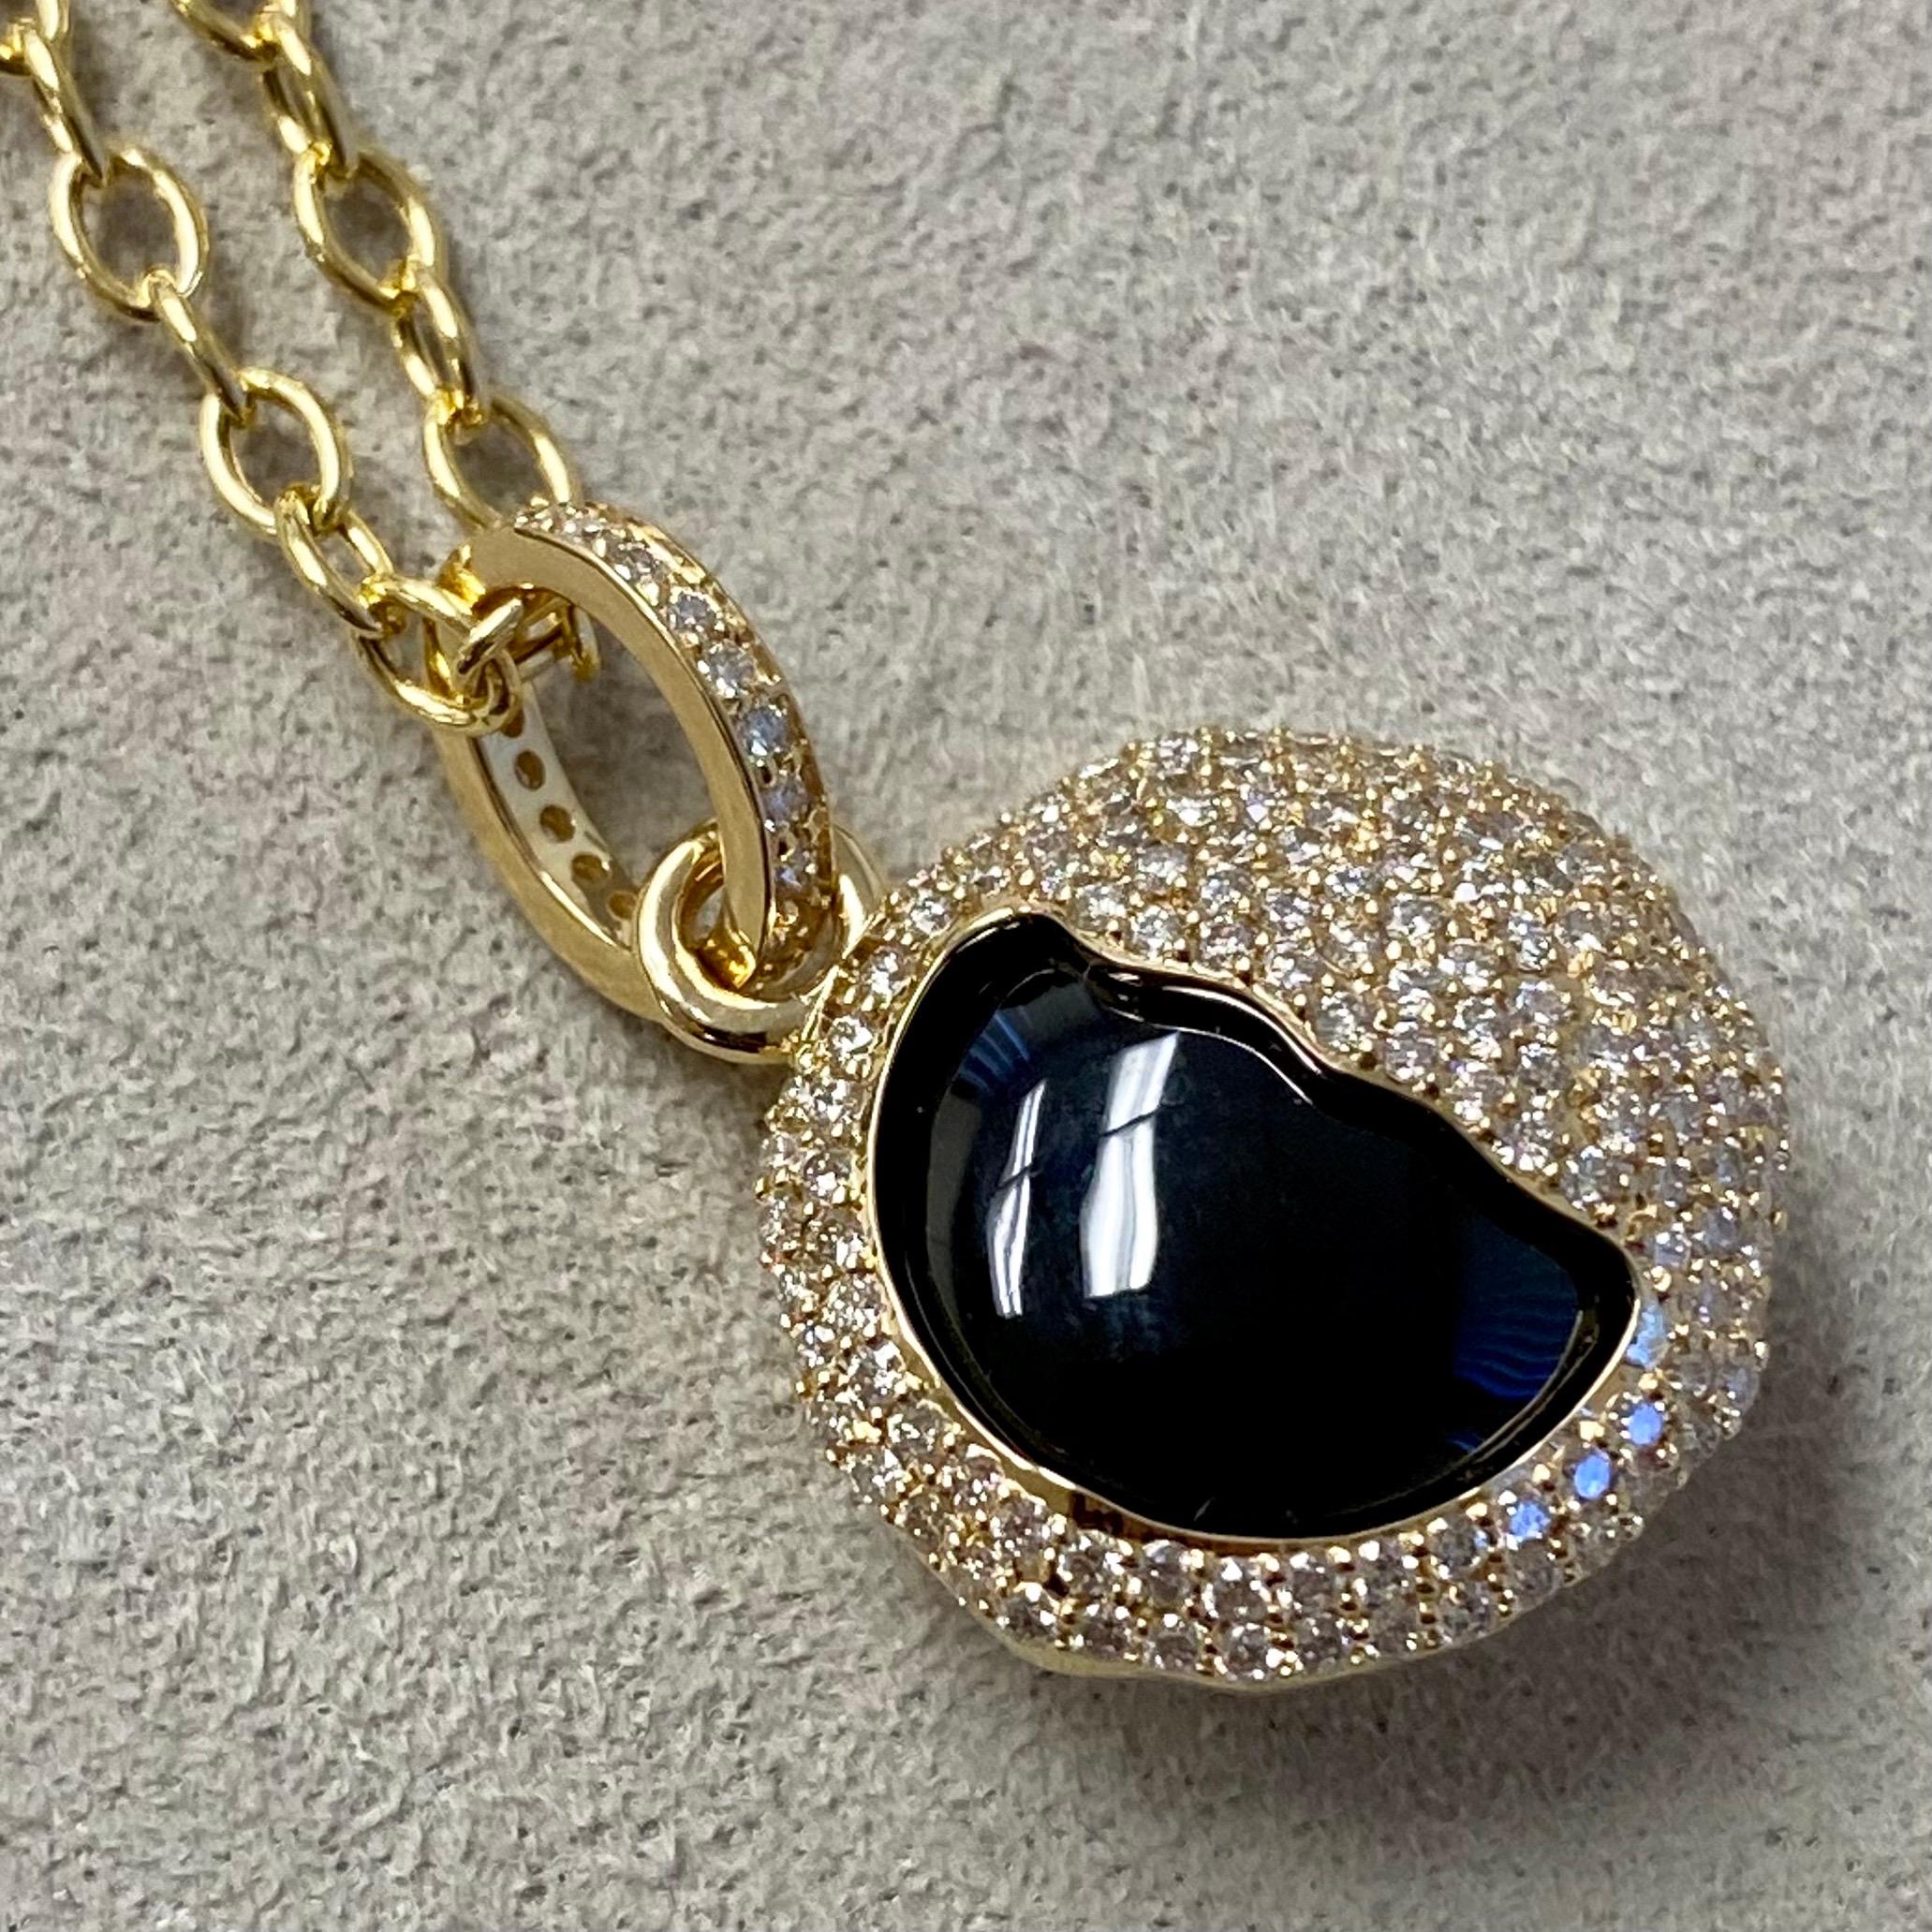 Created in 18 karat yellow gold
Black Onyx 13 carats approx.
Diamonds 0.80 carat approx.
Chain sold separately
One of a kind

Expertly cast from 18 carat yellow gold, this singular piece showcases a glittering diamond totalling 0.80 carats